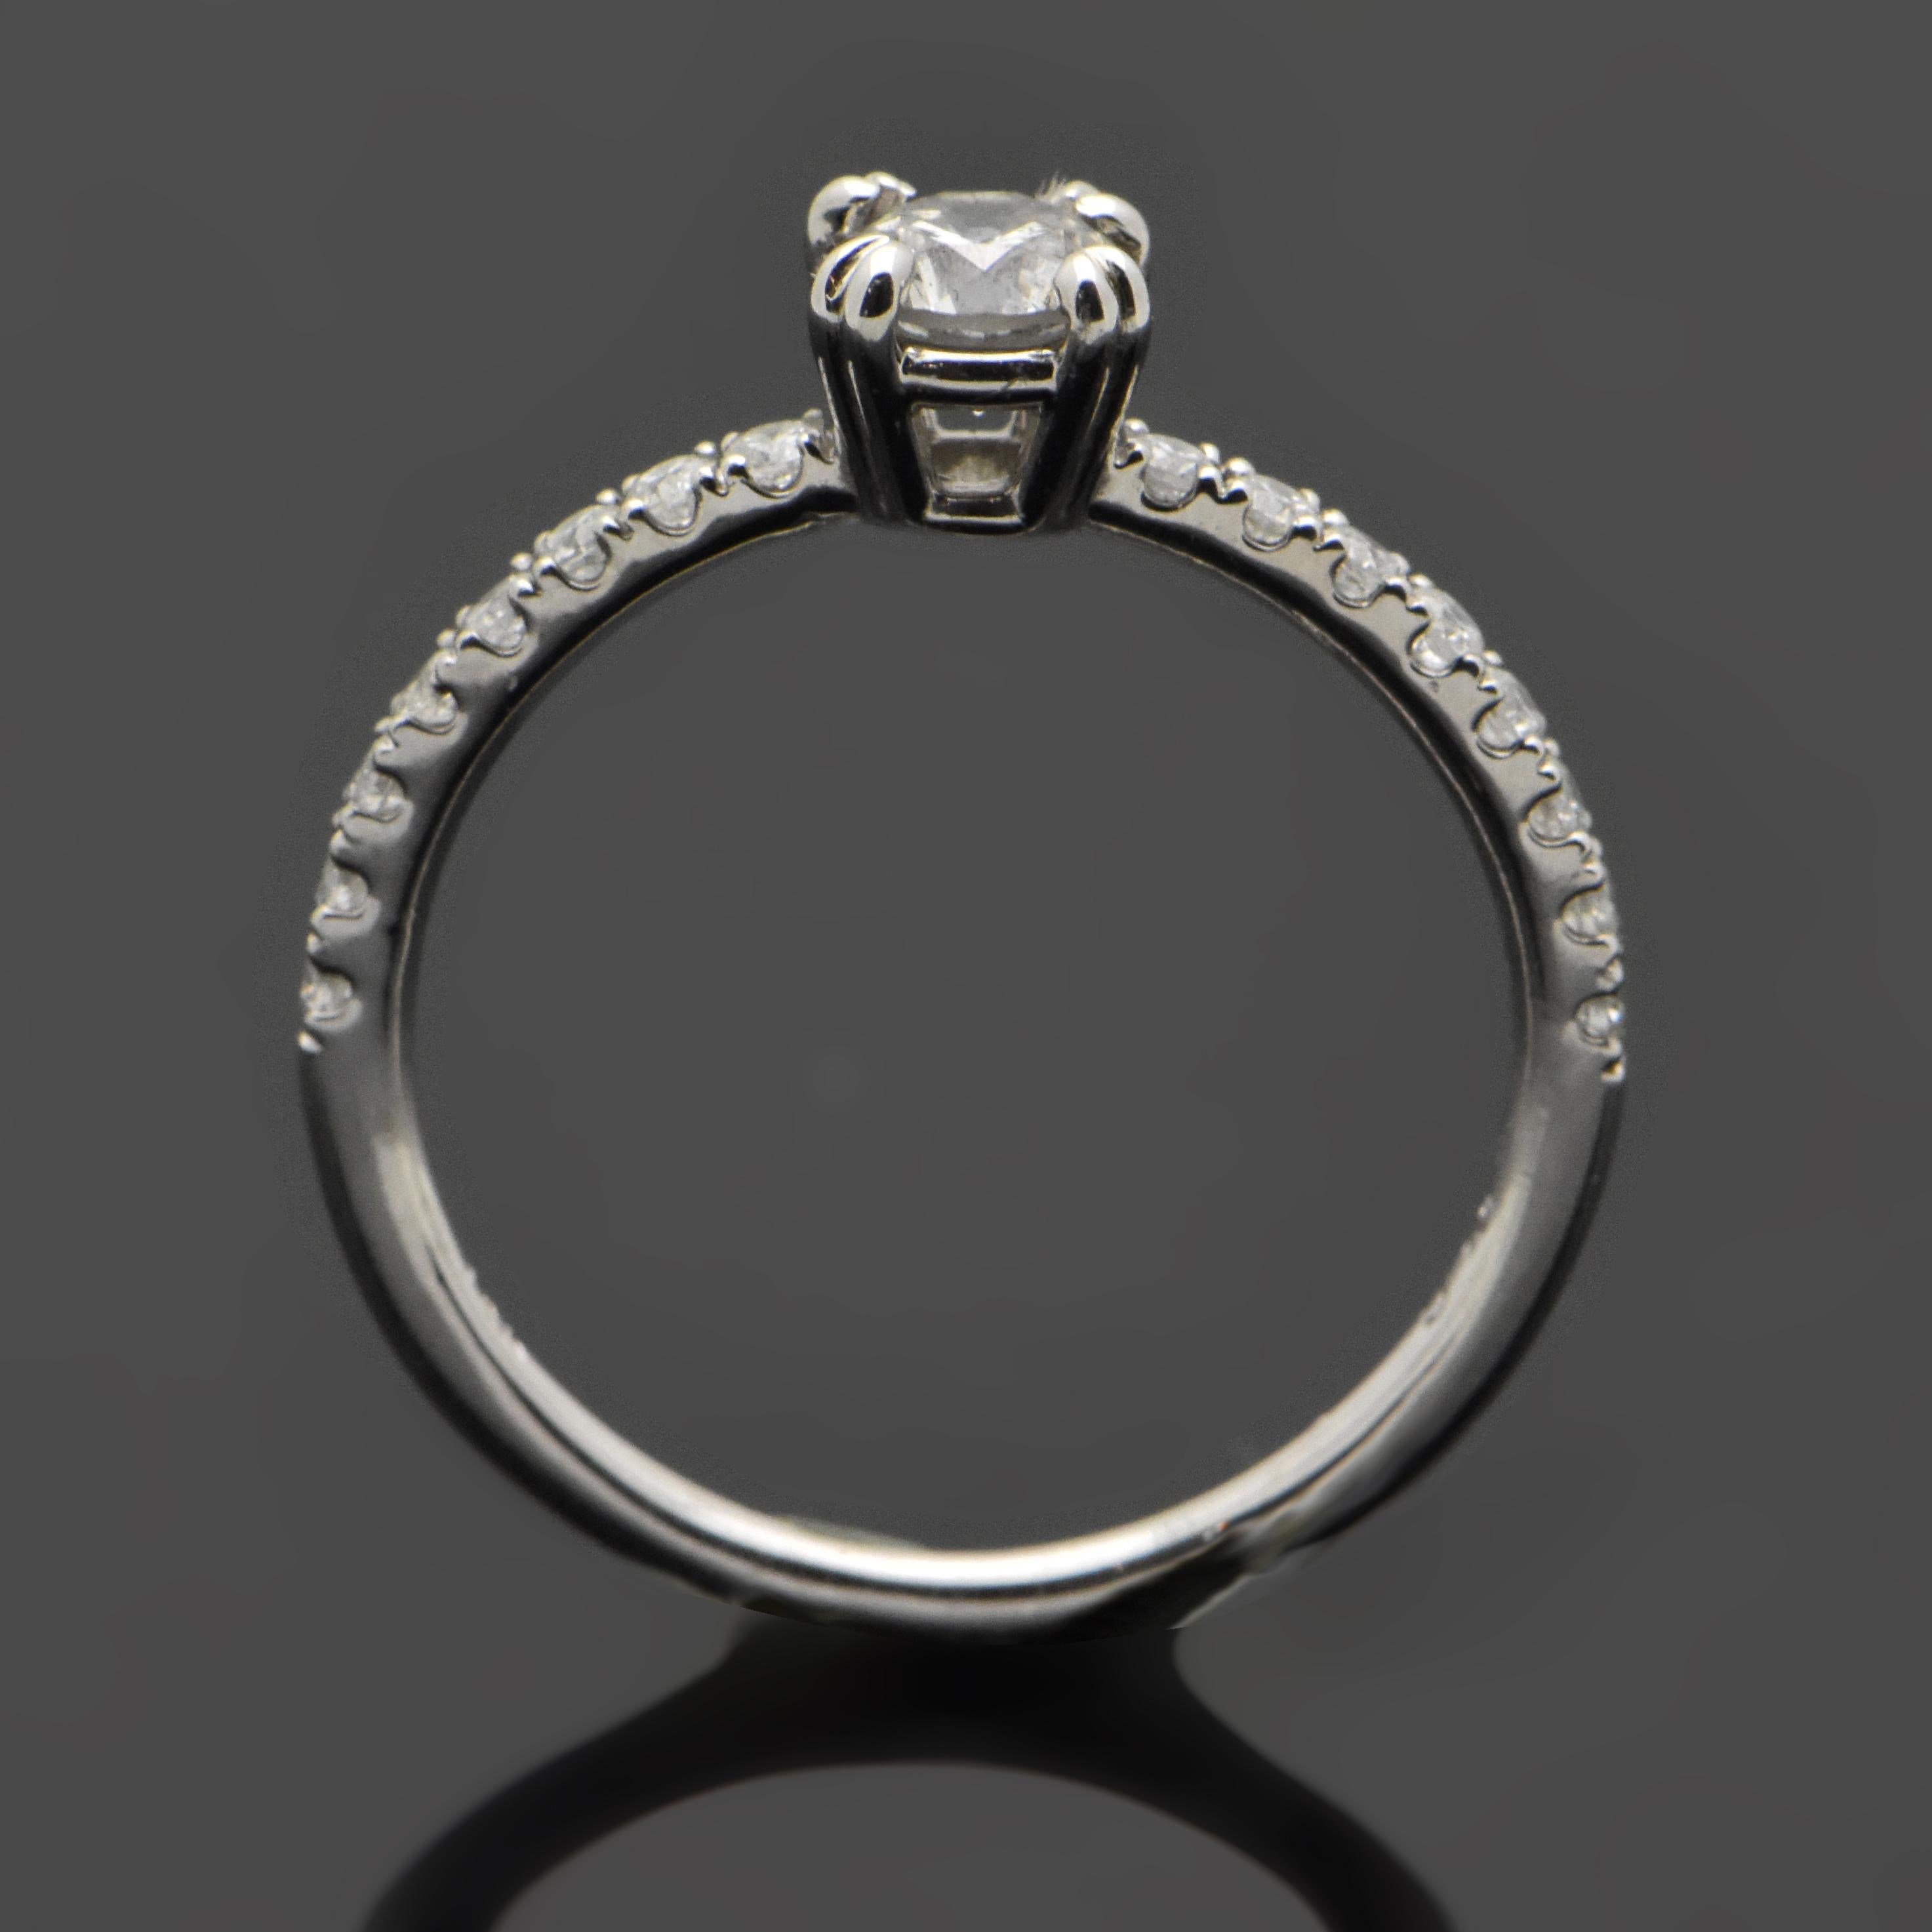 14kt White Gold Diamonds Ring. This ring features a round brilliant cut diamond with double prongs and 8 diamonds down each shank set in white gold.

This item is a custom order only. Price for the ring setting only. The stones will be priced